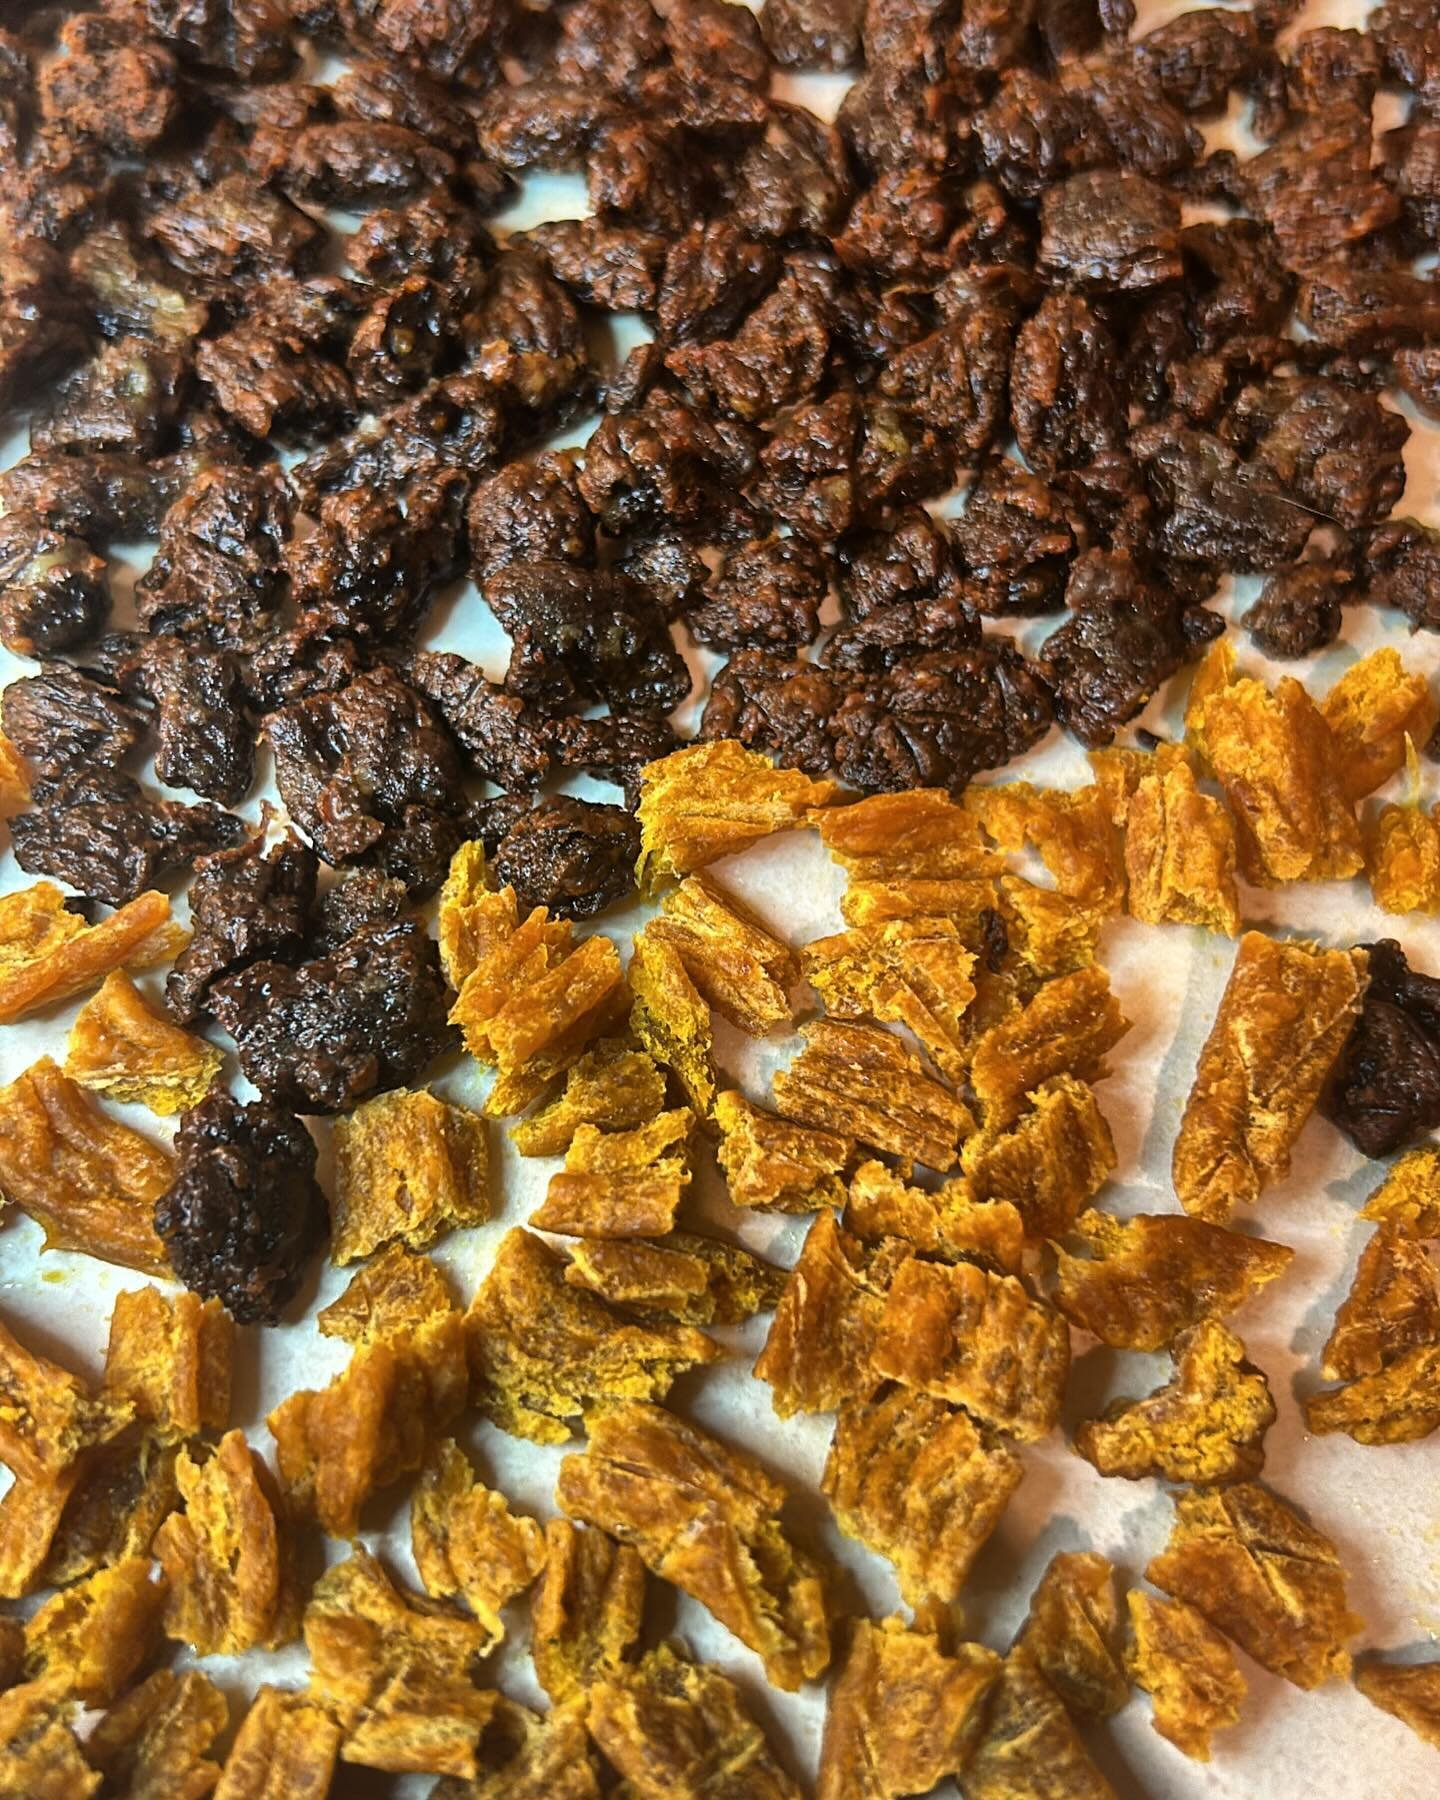 If you&rsquo;ve been searching for all-natural pet treats made with nothing but the good stuff, look no further then @jerkybons 

We&rsquo;ve got your pal&rsquo;s favourites on tap with our Island Chicken &amp; Island Beef Jerky Bons🍖🥕🥦🥩 now avai